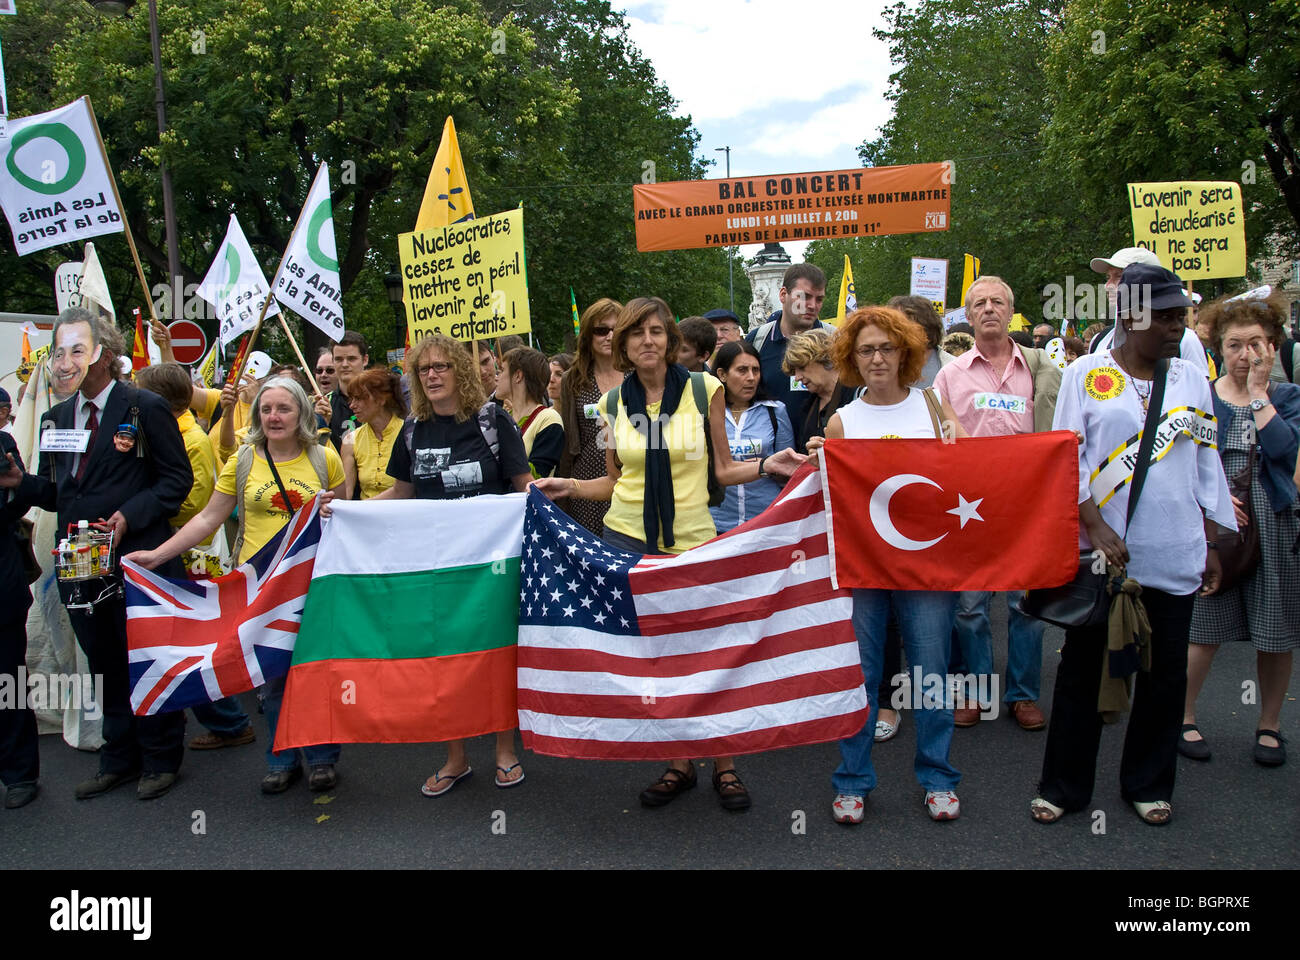 Paris, FRANCE - Large Crowd people, Front, Anti-Nuclear Power Demonstration by Several Environmental N.G.O's. International Anti-Nuclear Power Activists, international Politics, country flags Stock Photo